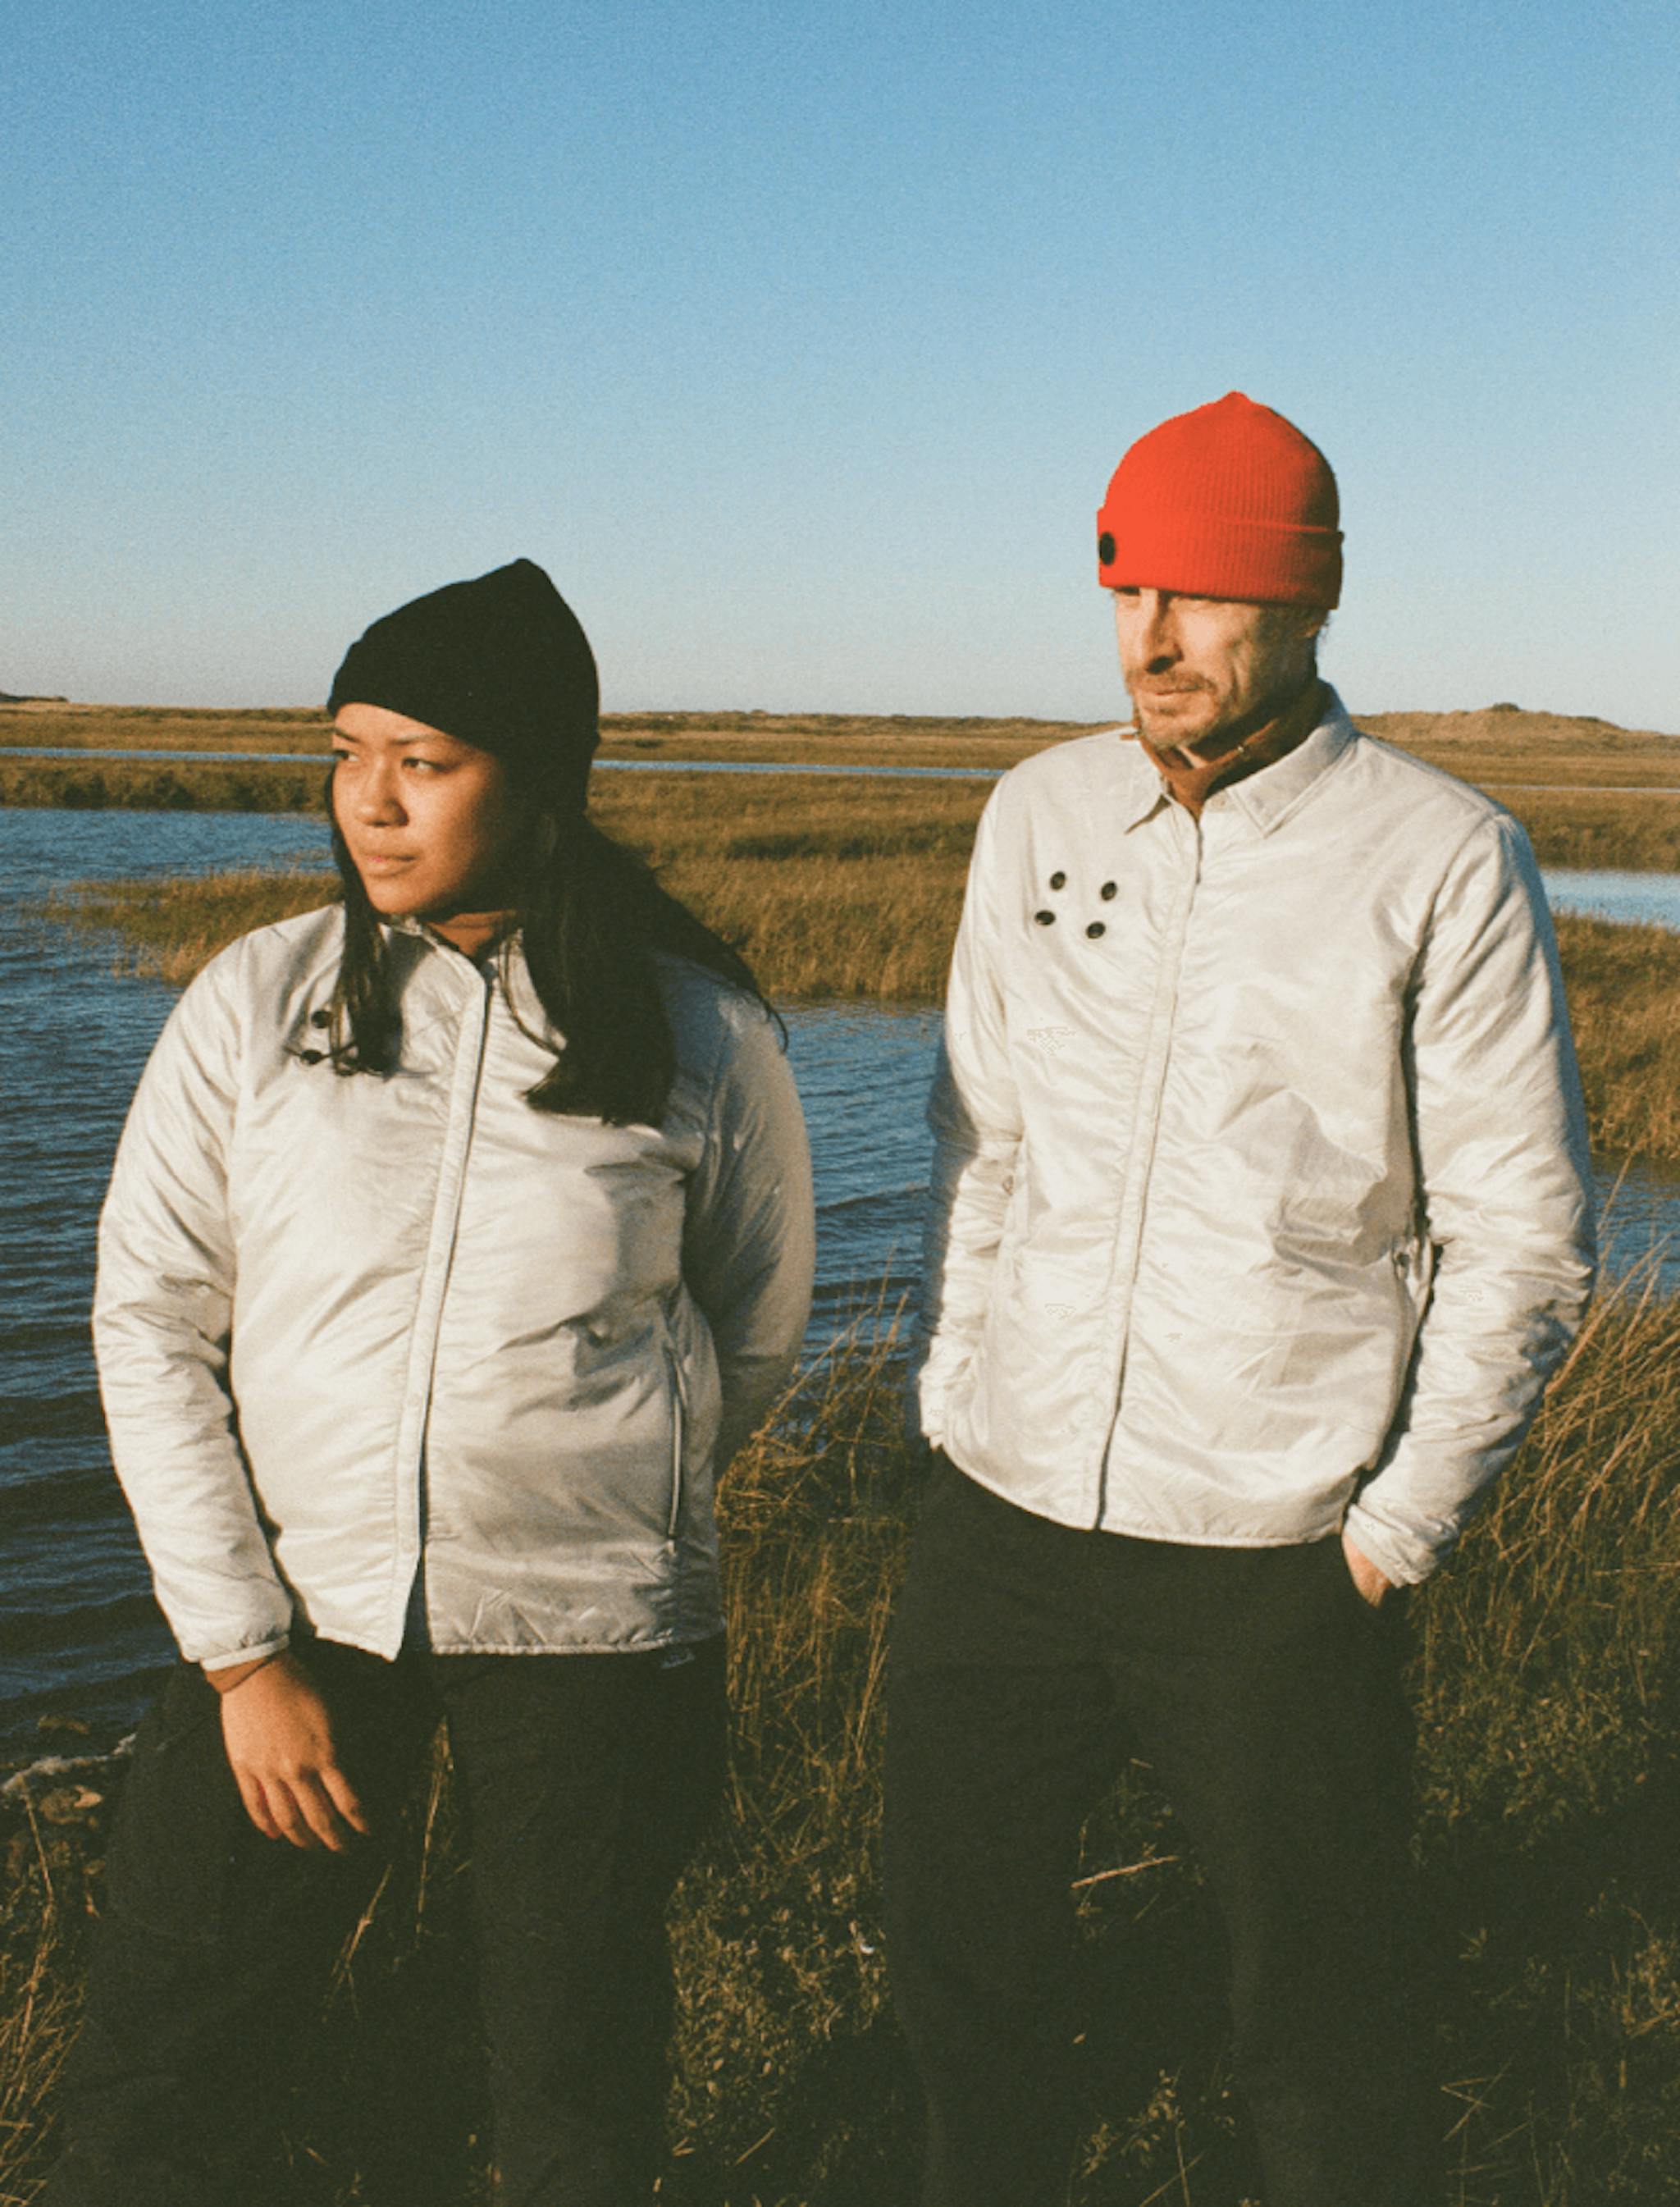 Two individuals in silver jackets and beanies, one black and one red, standing in the late afternoon sun by a marshland.